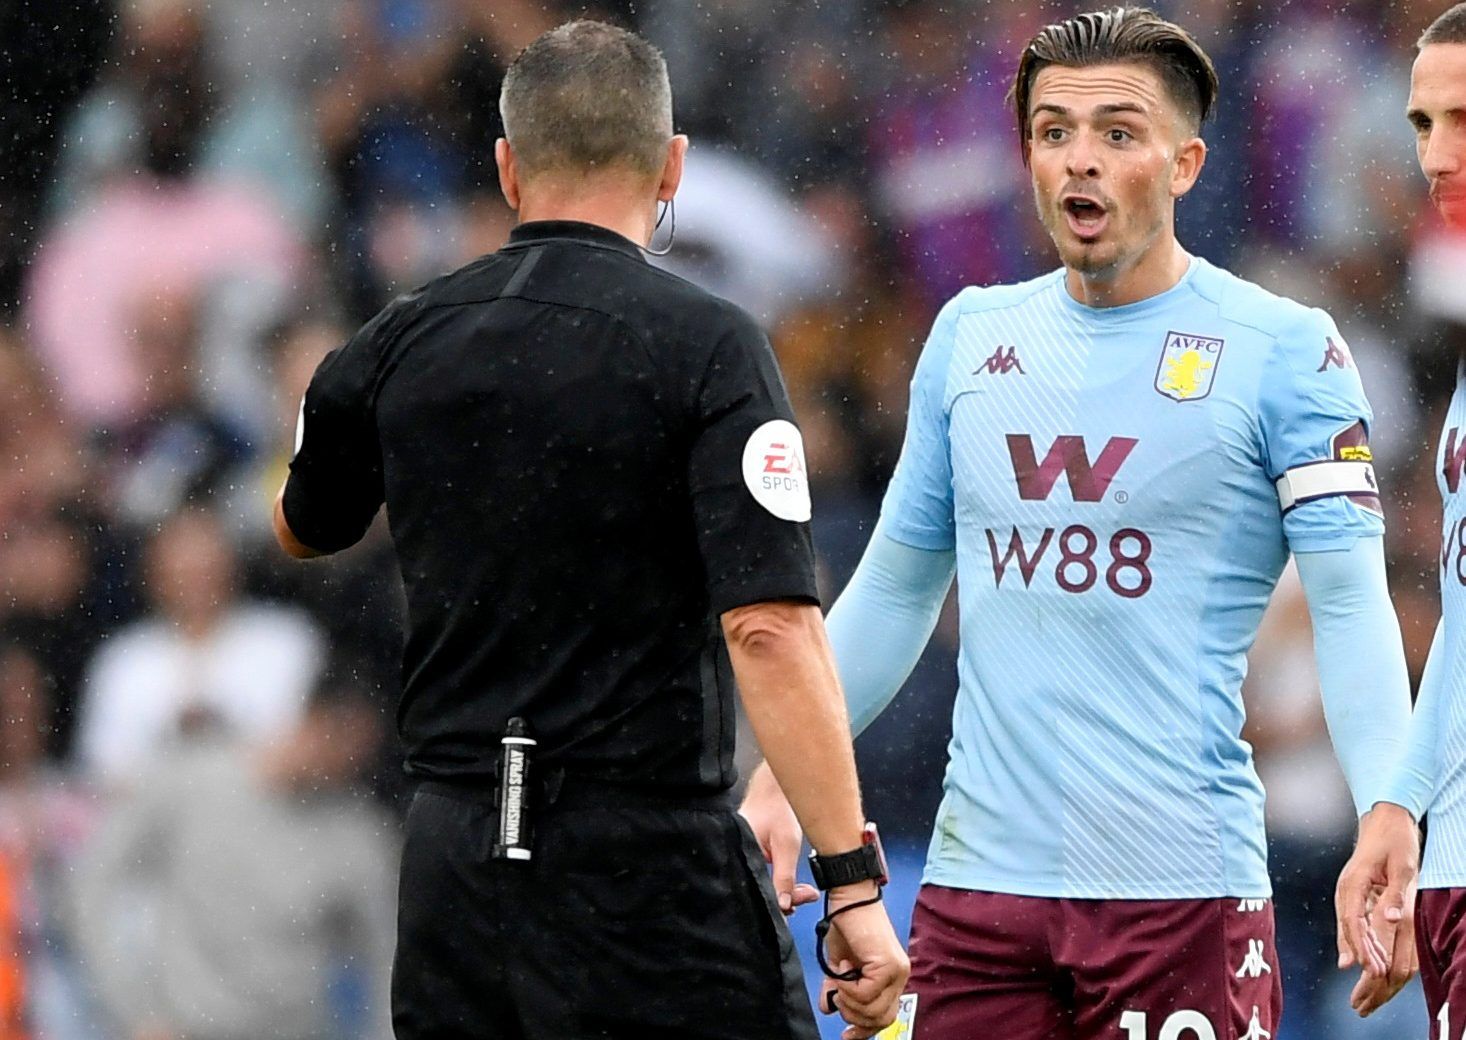 Soccer Football - Premier League - Crystal Palace v Aston Villa - Selhurst Park, London, Britain - August 31, 2019  Aston Villa's Jack Grealish remonstrates with referee Kevin Friend after a goal is disallowed          Action Images via Reuters/Tony O'Brien  EDITORIAL USE ONLY. No use with unauthorized audio, video, data, fixture lists, club/league logos or 